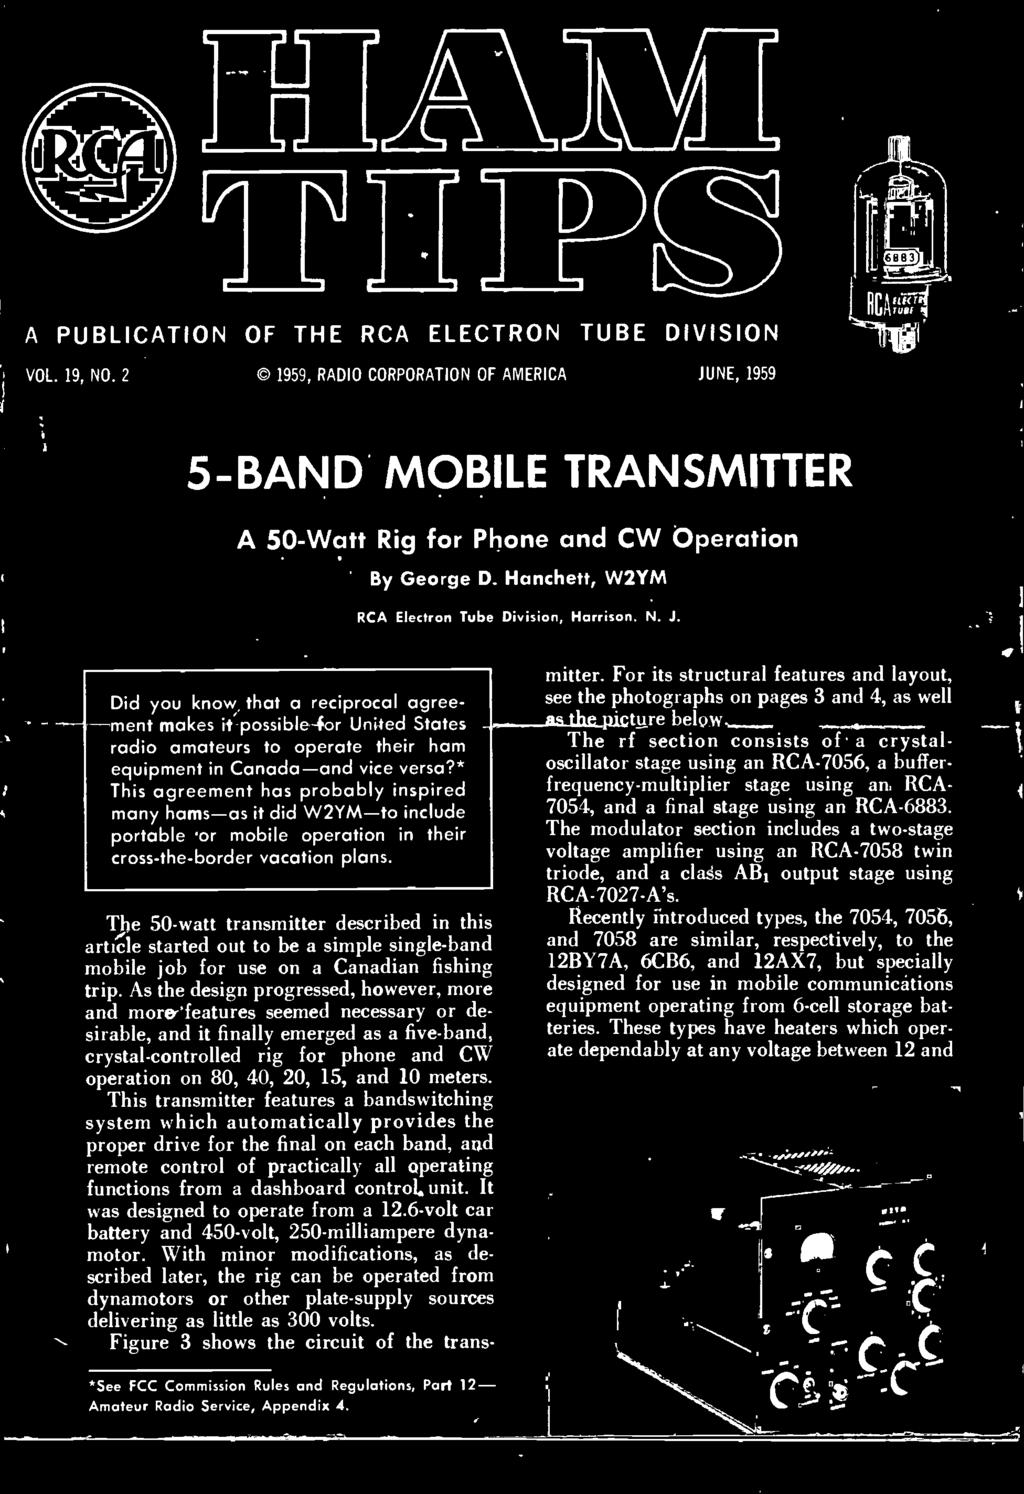 The 50 -watt transmitter described in this article started out to be a simple single -band mobile job for use on a anadian fishing trip.